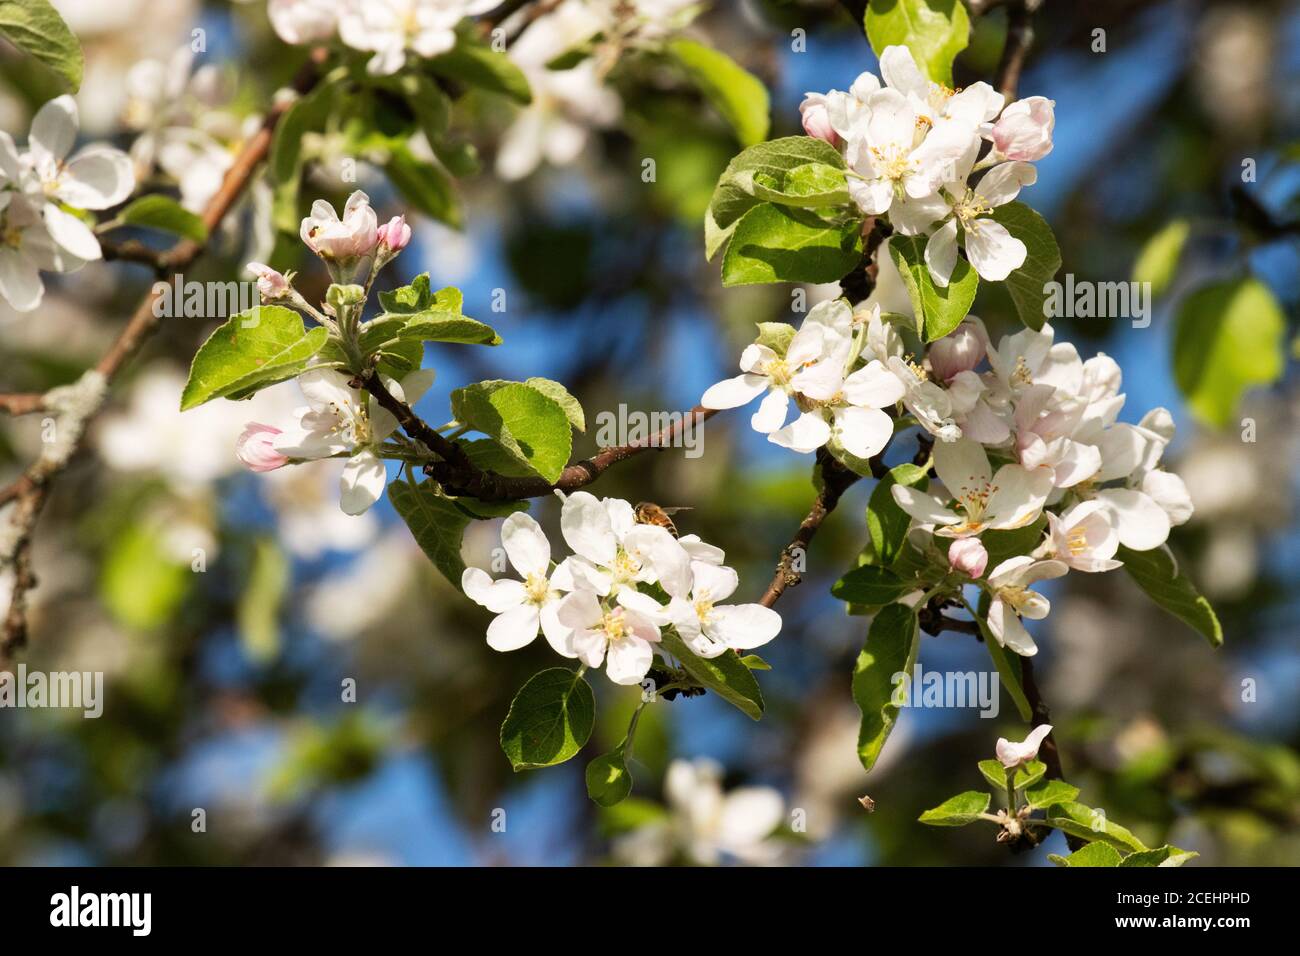 A beautiful flowering apple tree with white blossoms during spring in rural Estonia, Northern Europe. Stock Photo